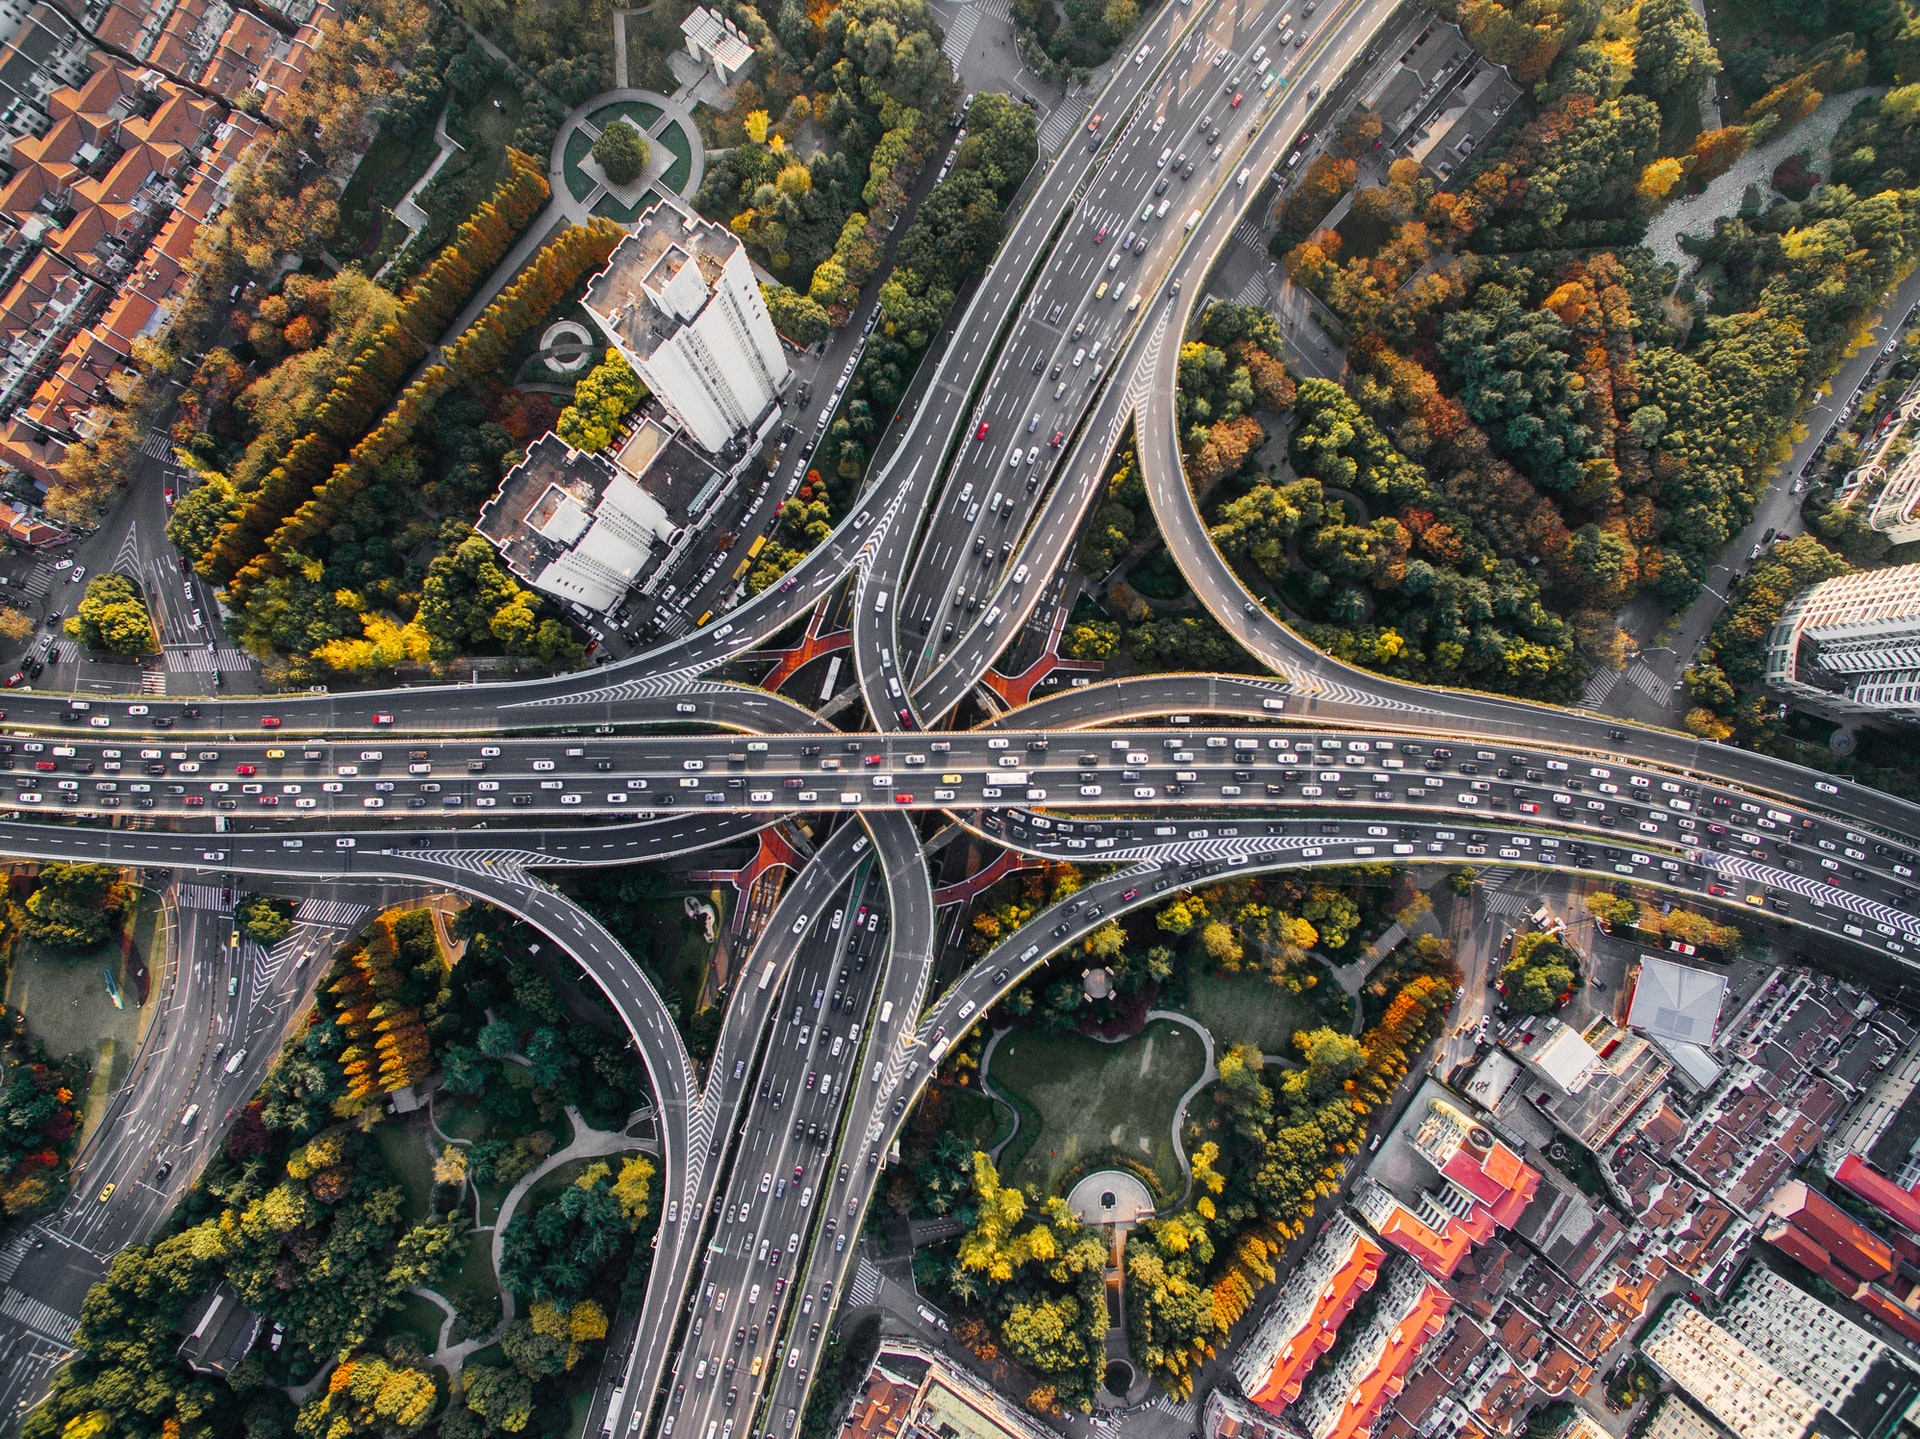 Theory of Constraints traffic jam on multiple highway intersection